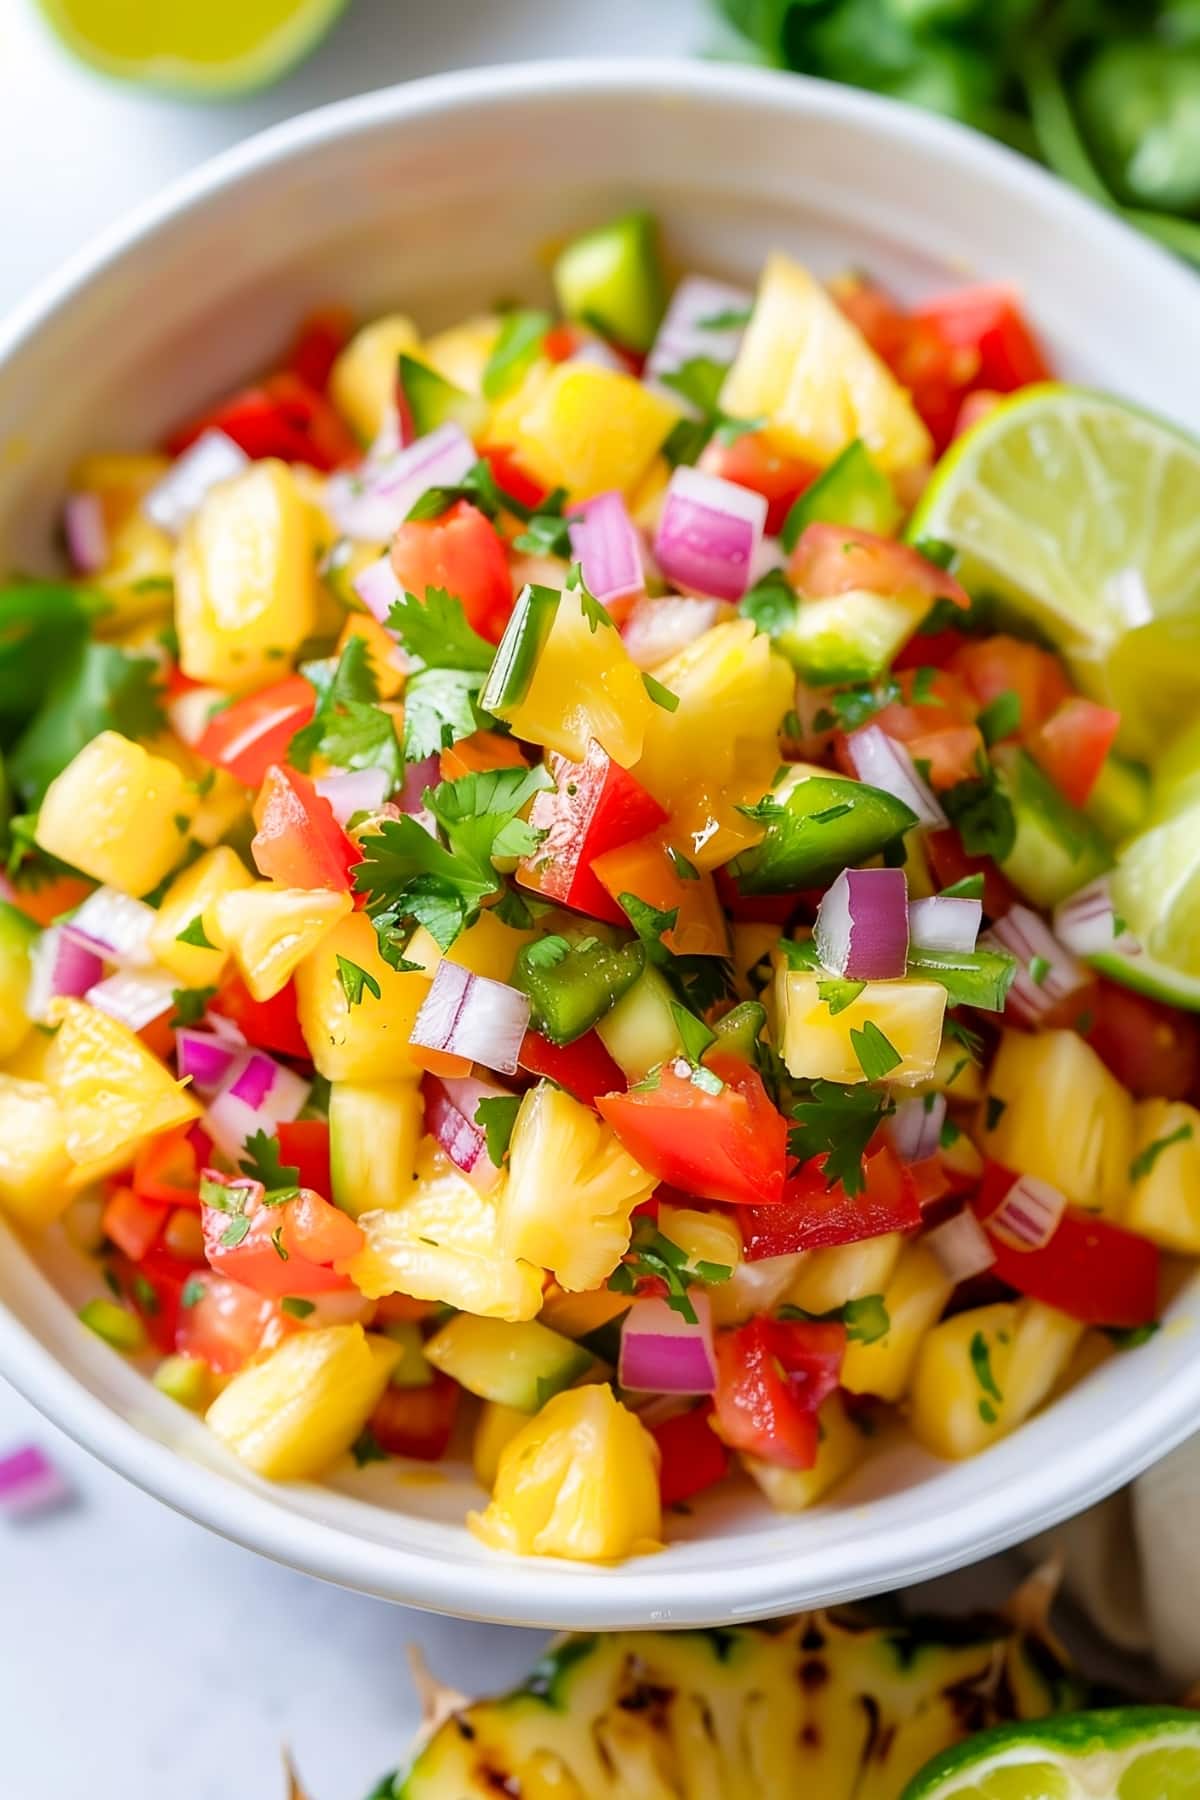 Bowl of homemade pineapple salsa with tomatoes, onions and cilantro